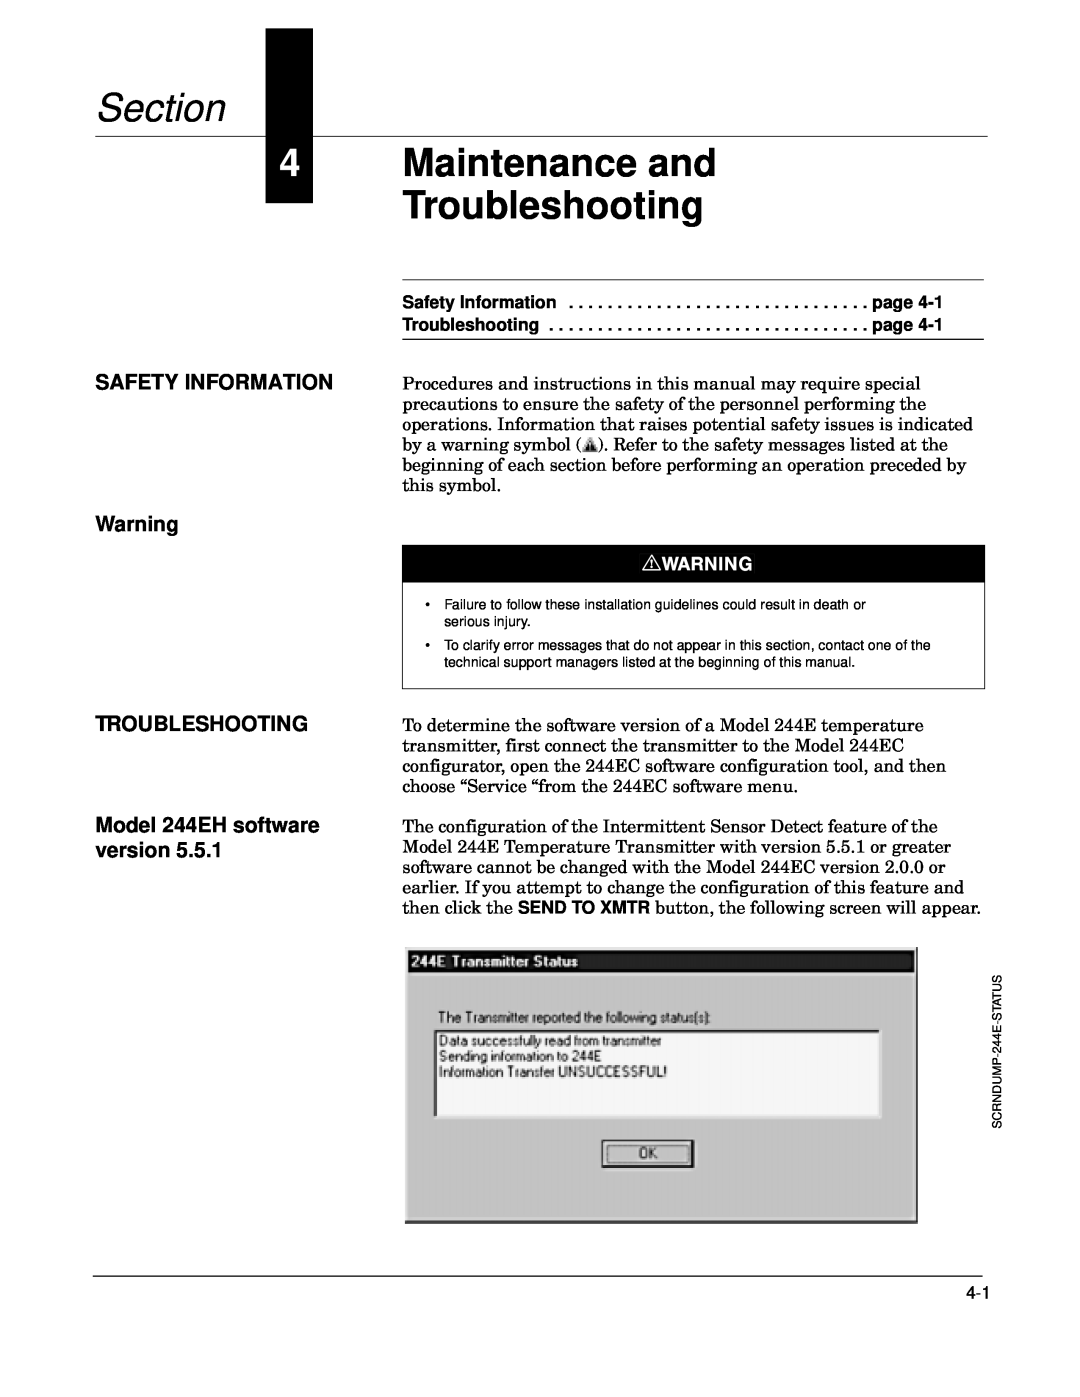 Fisher manual Maintenance and Troubleshooting, Safety Information, TROUBLESHOOTING Model 244EH software version, Section 